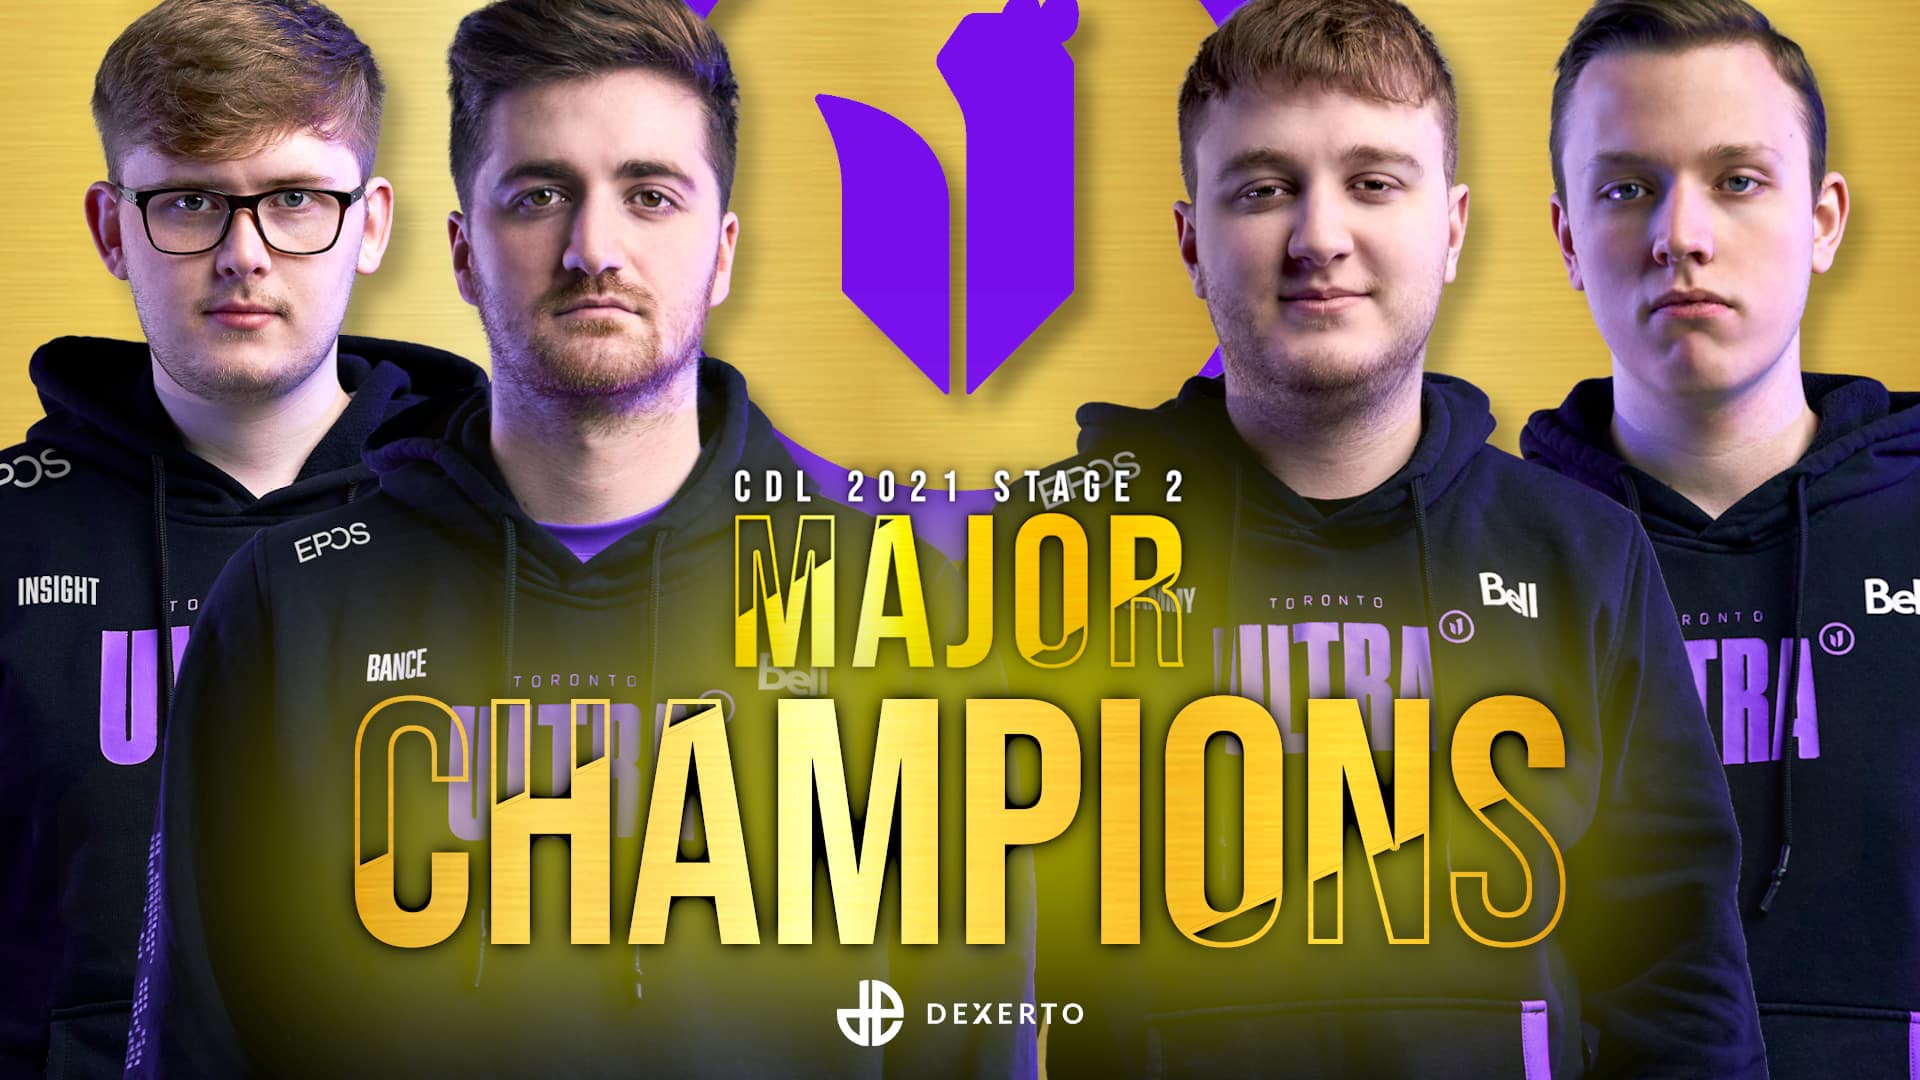 toronto ultra cdl stage 2 major champions recap highlights final placements scores bracket